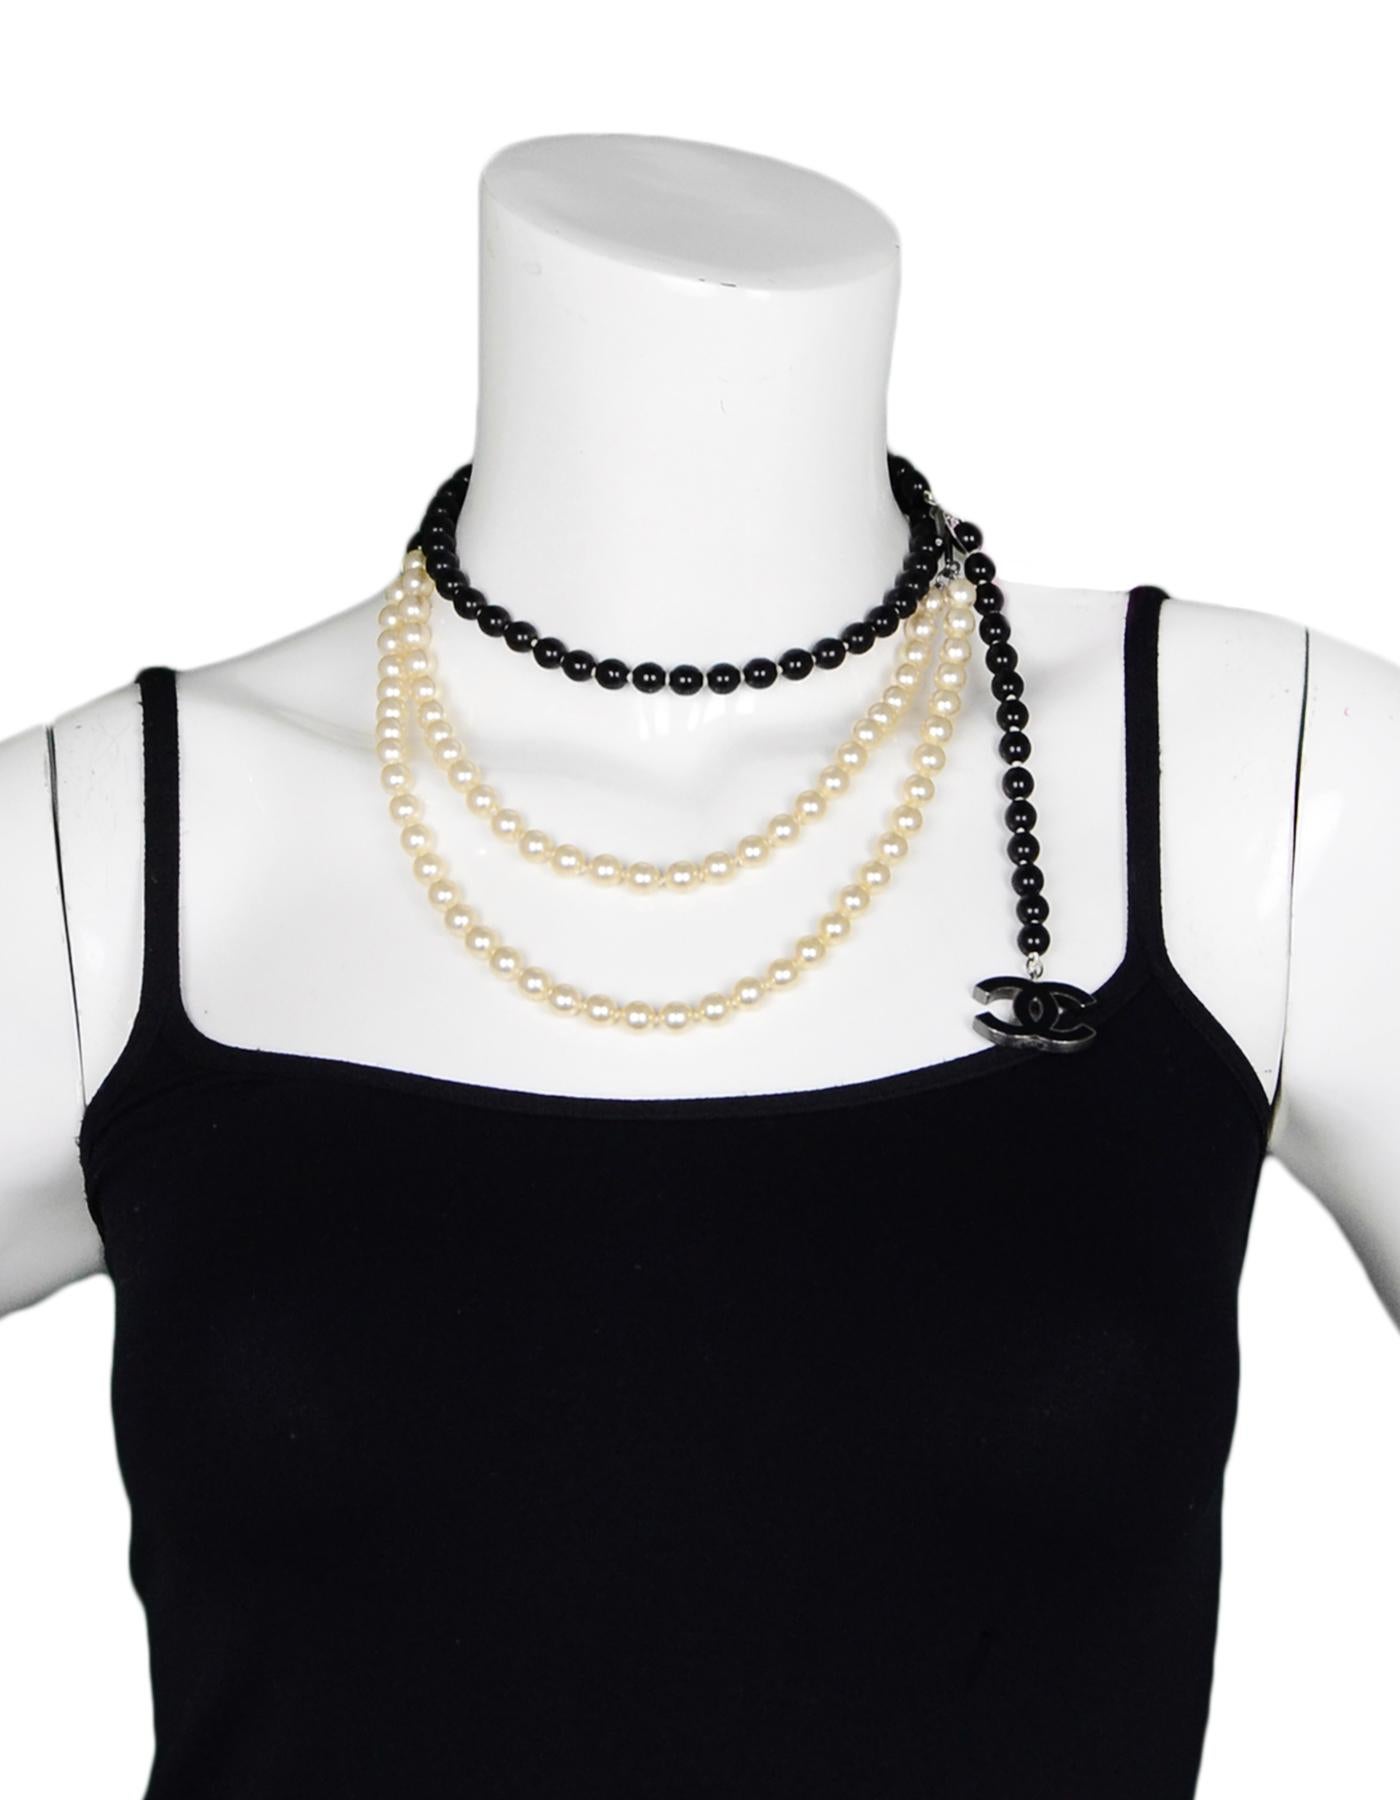 Beige Chanel 2005 Black Bead and Faux Pearl CC Belt/ Necklace